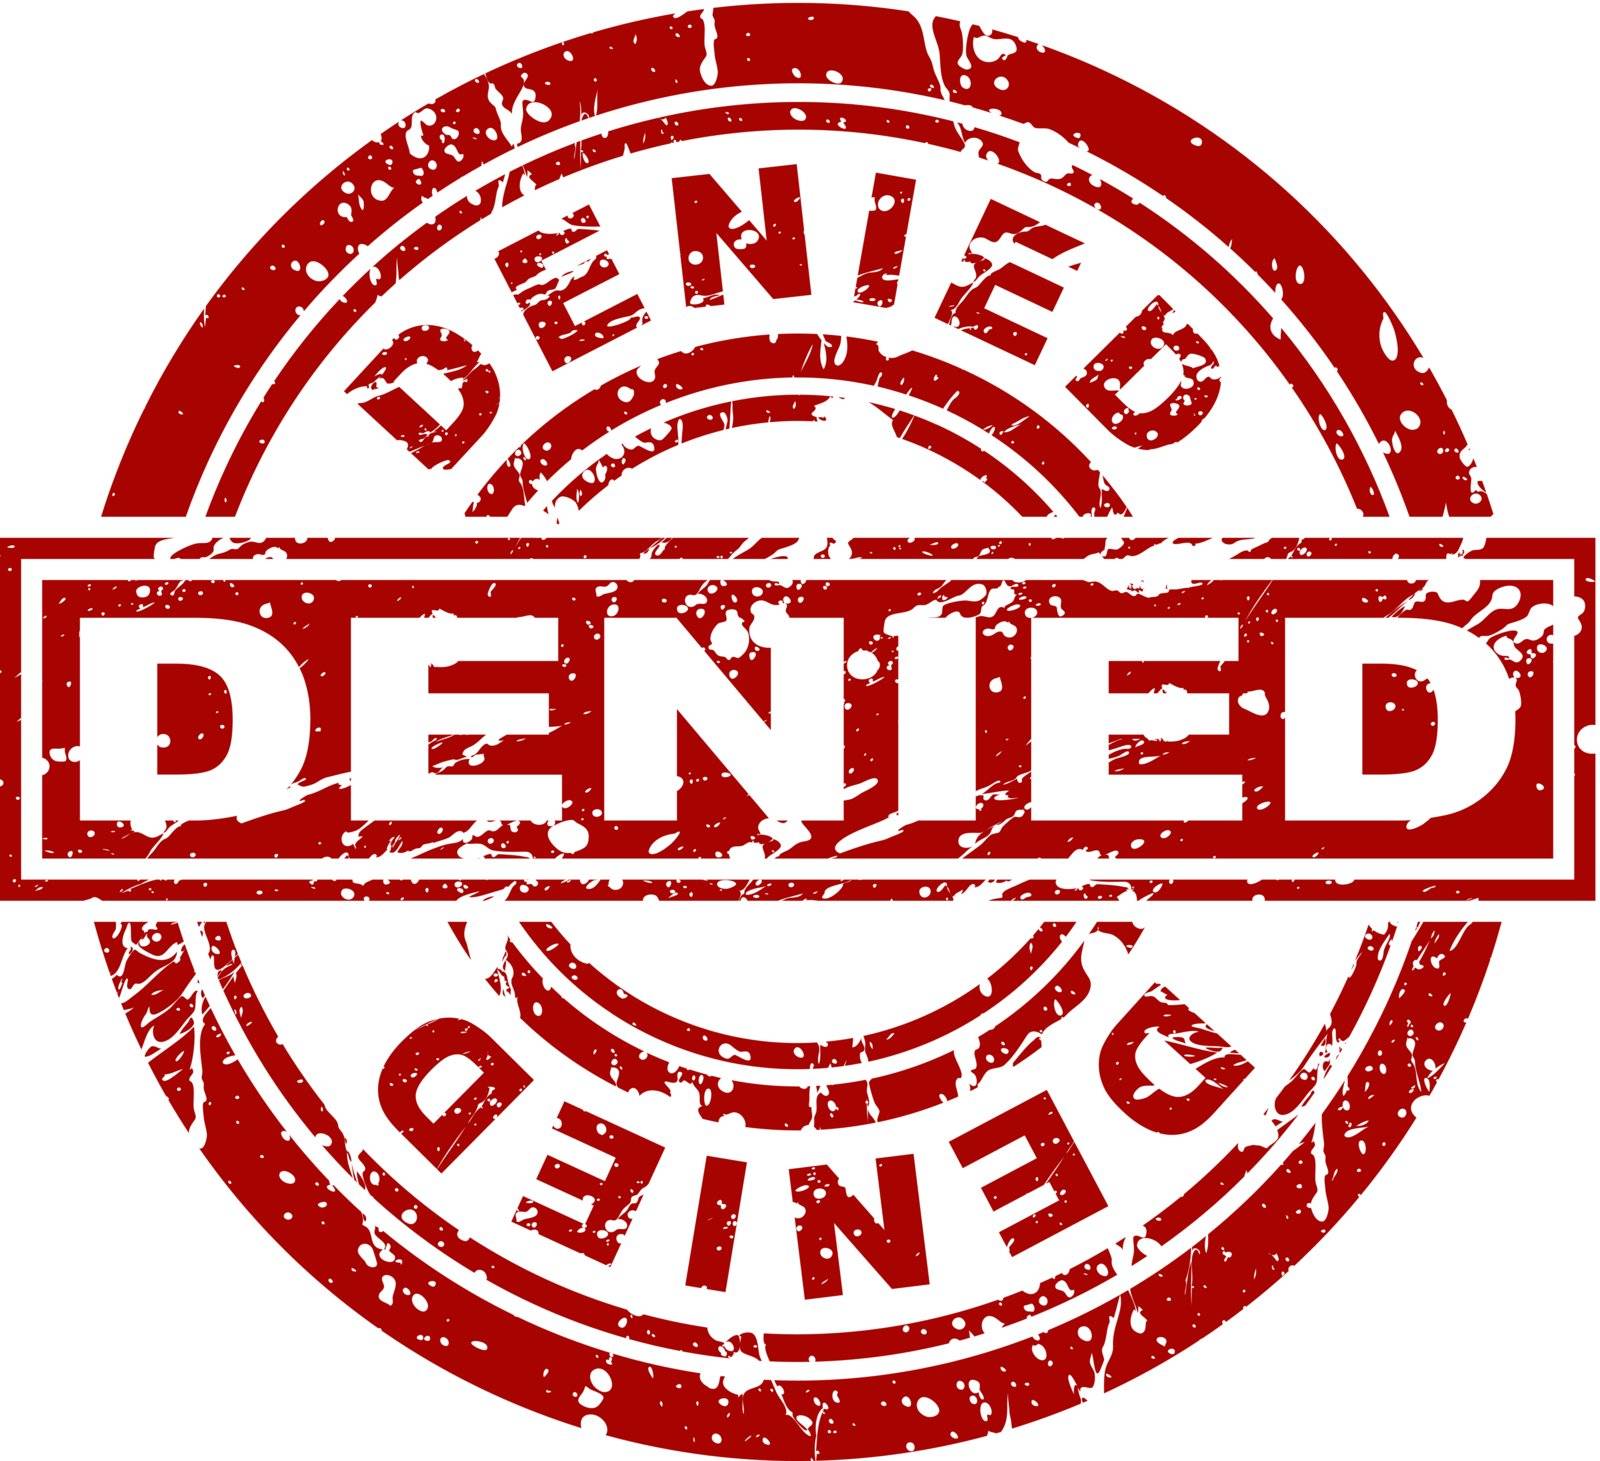 An image of a denied stamp.